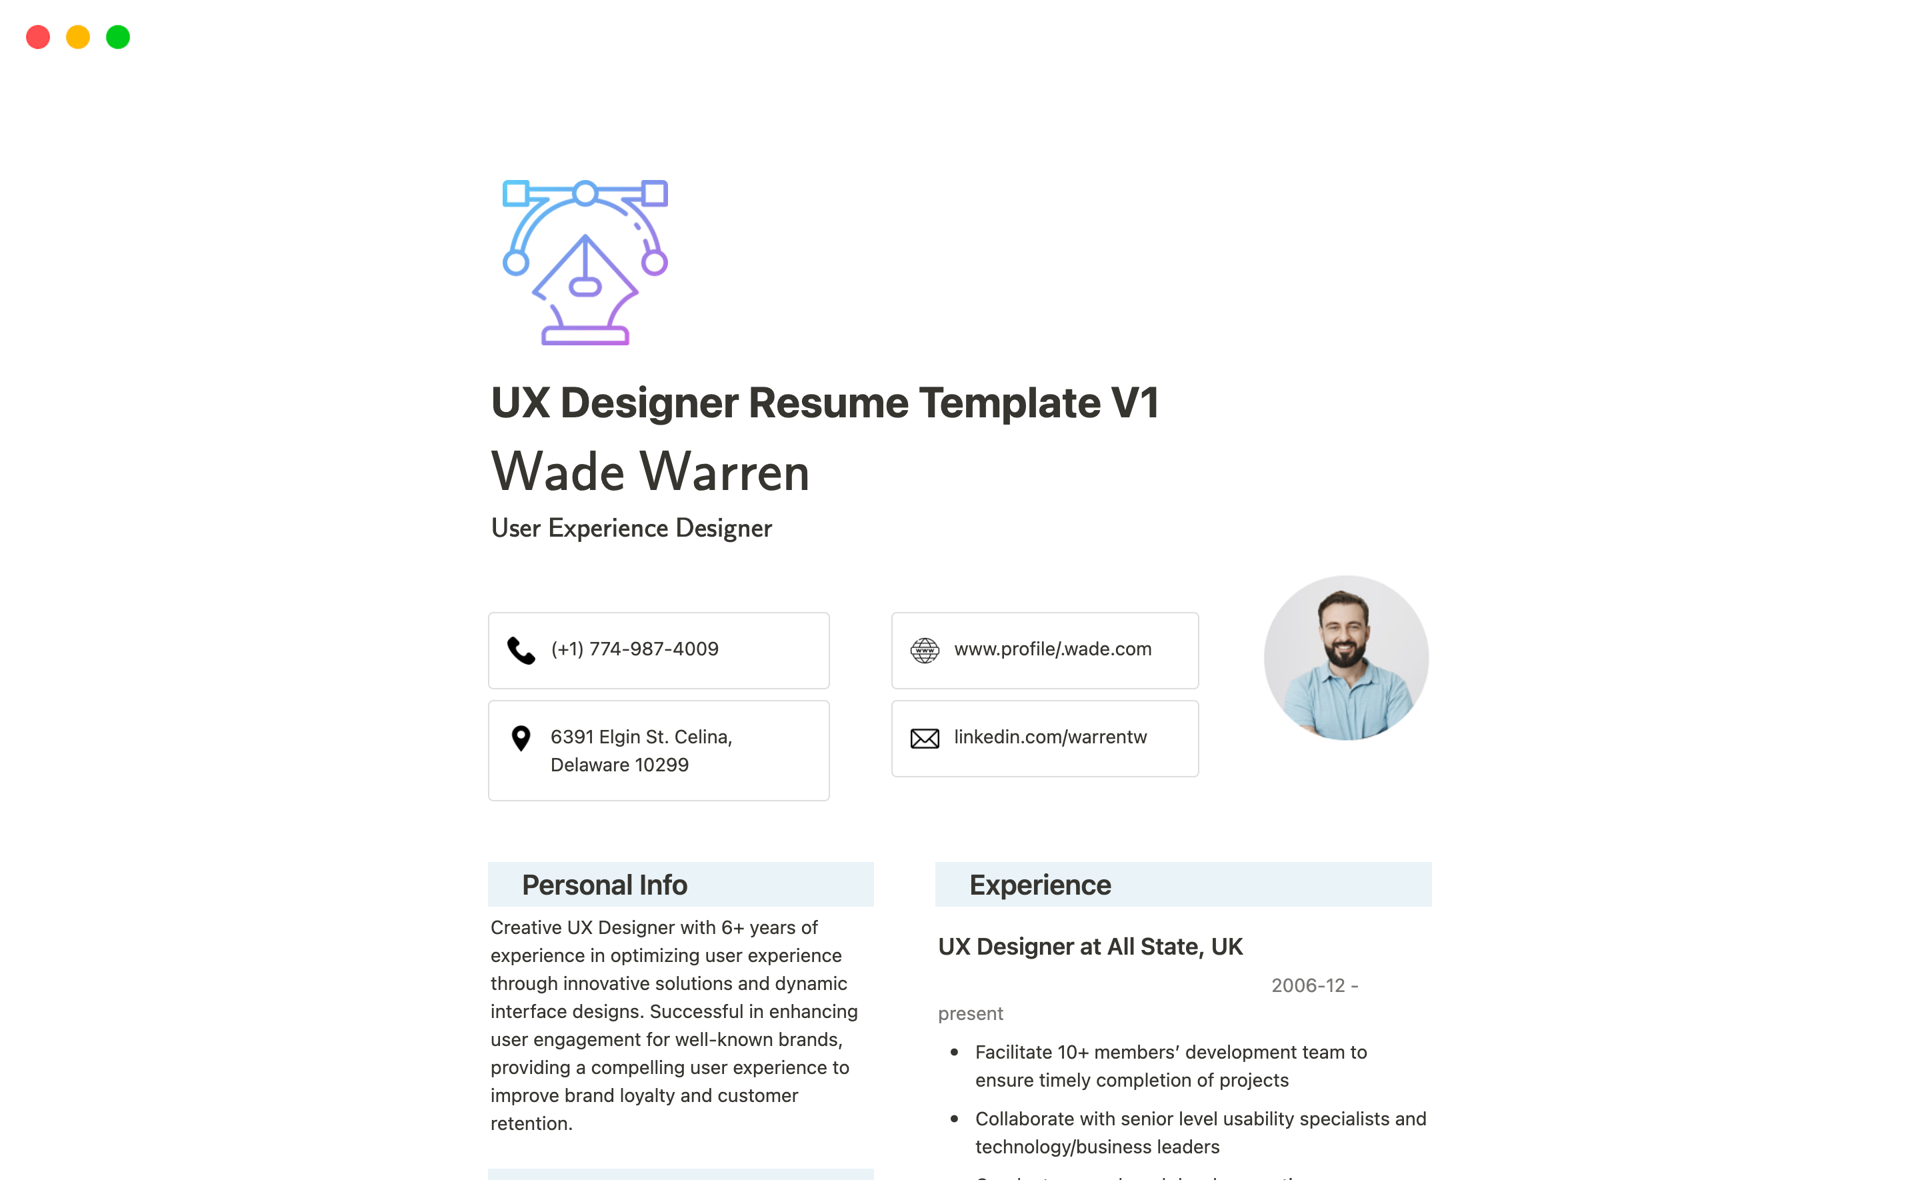 A template preview for UX Designer Resume